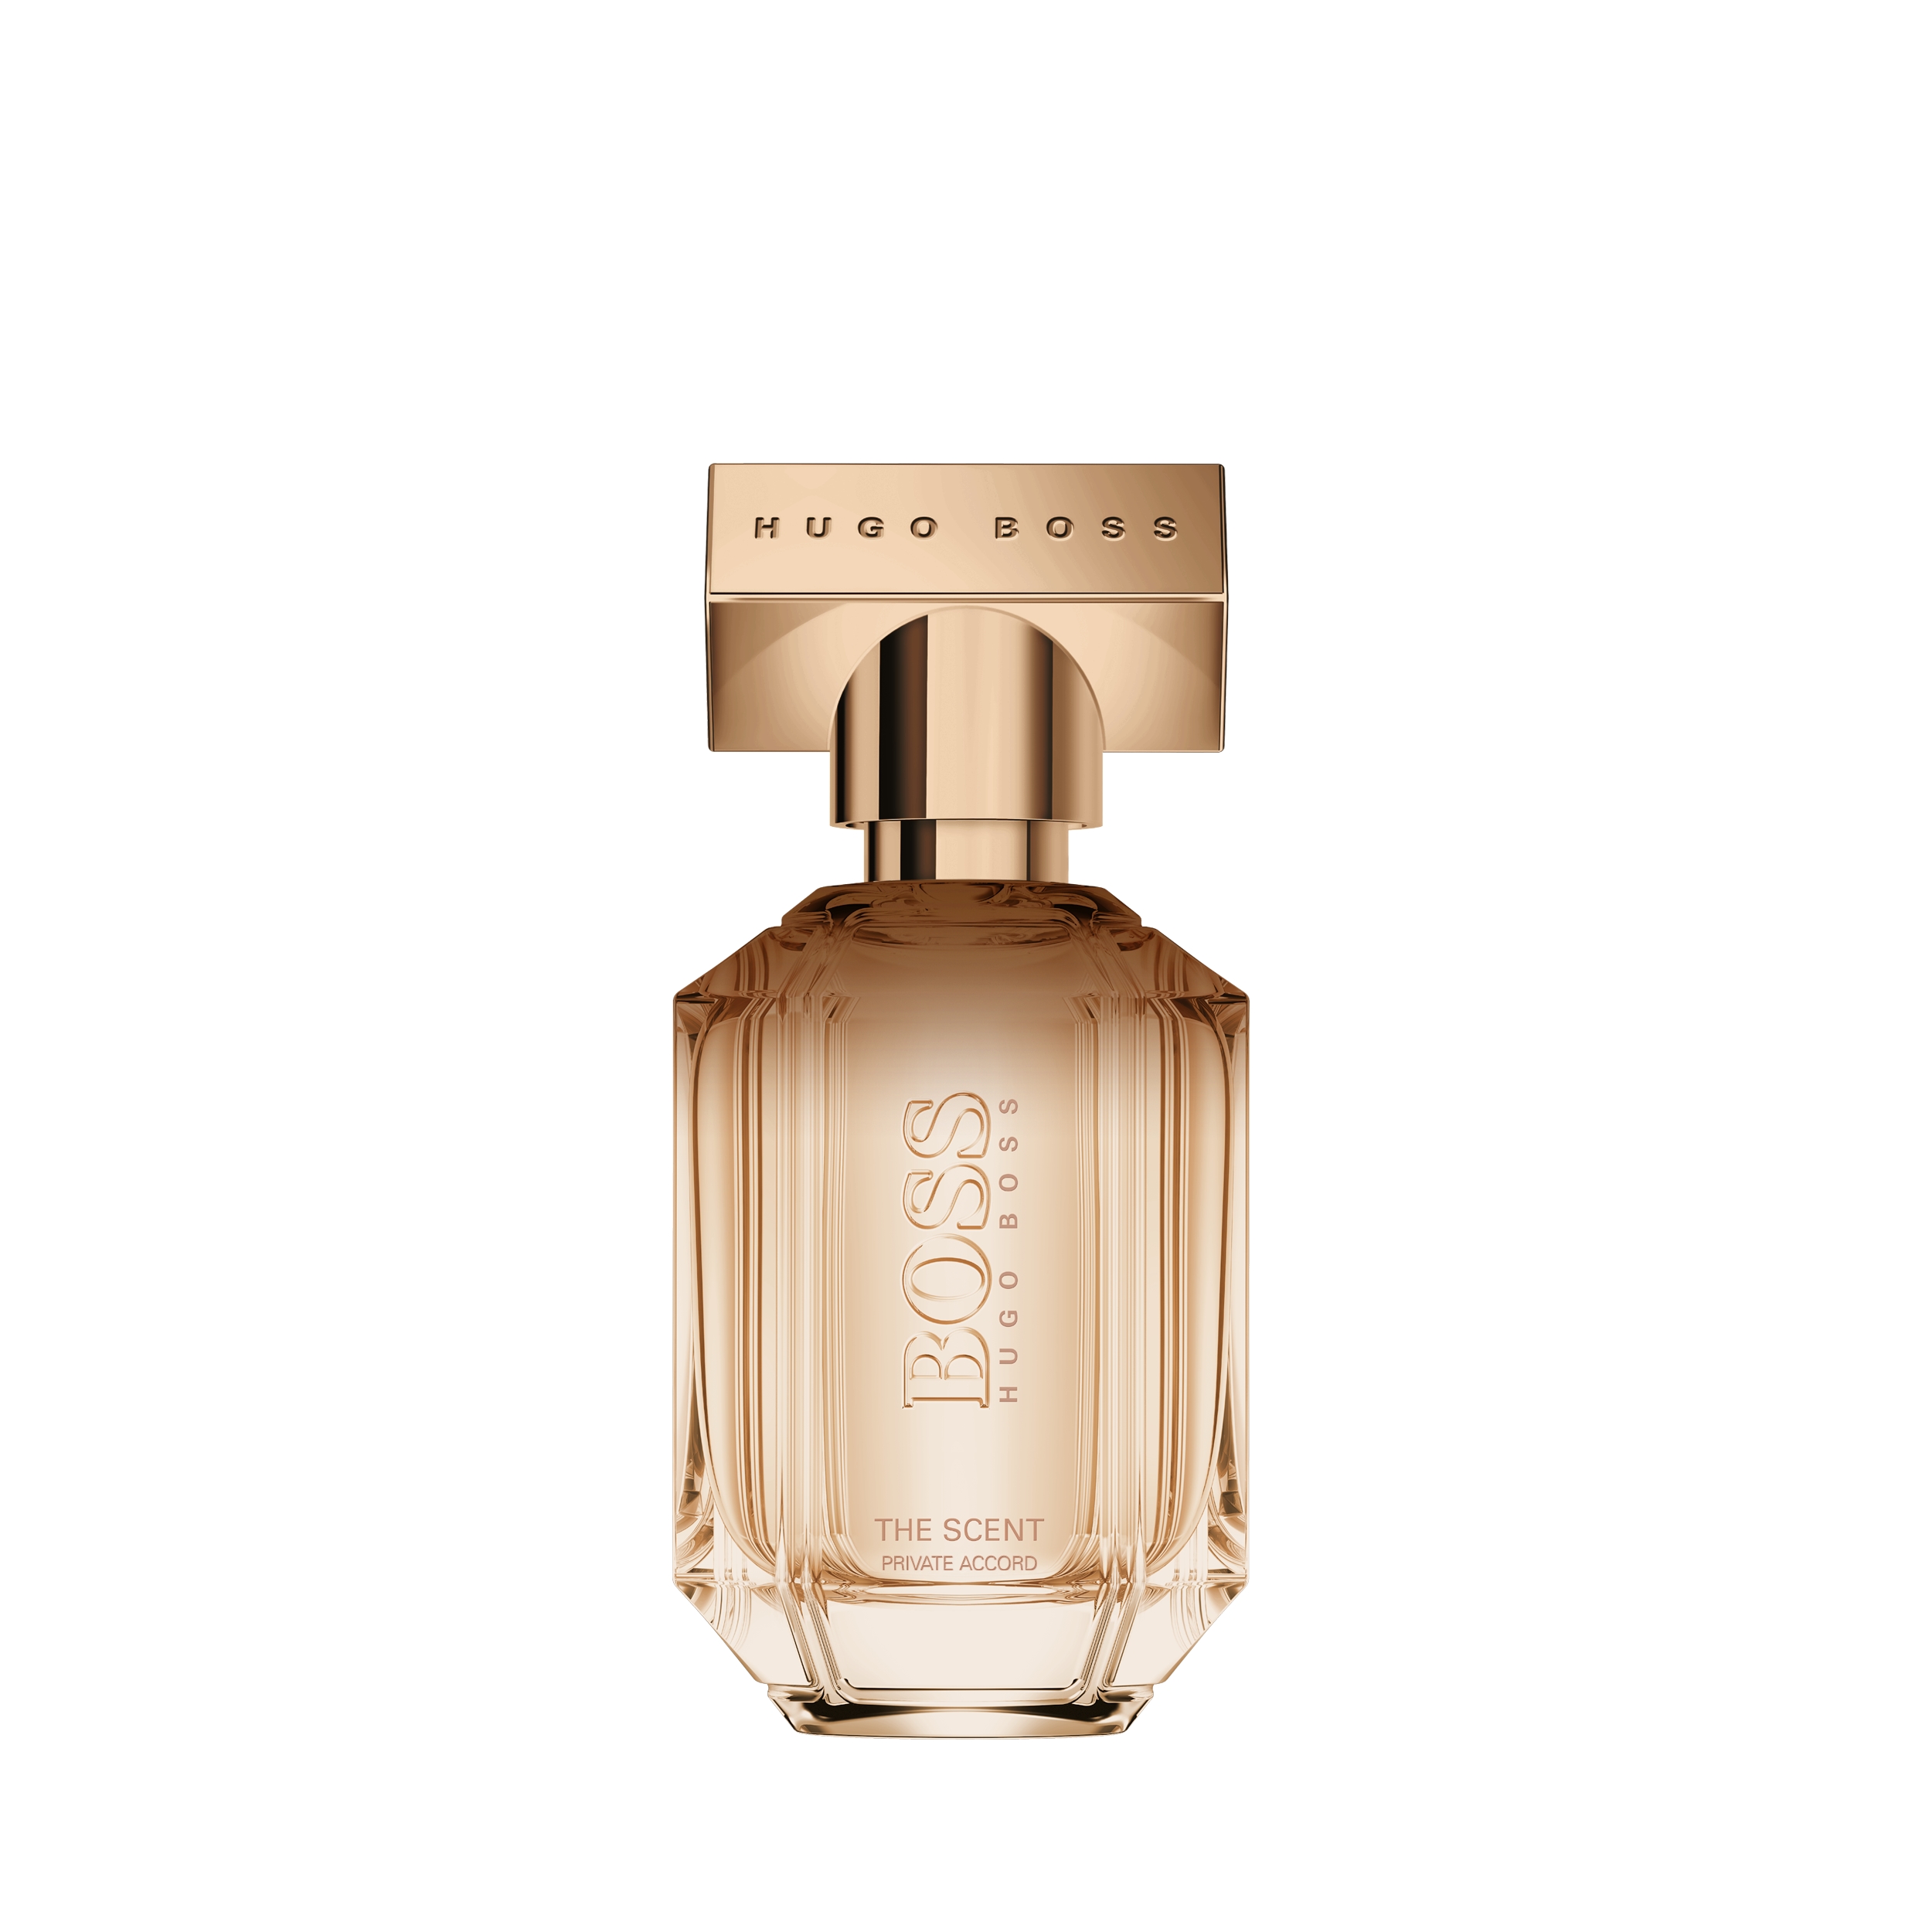  BOSS The Scent For Her Private Accord Eau de Parfum